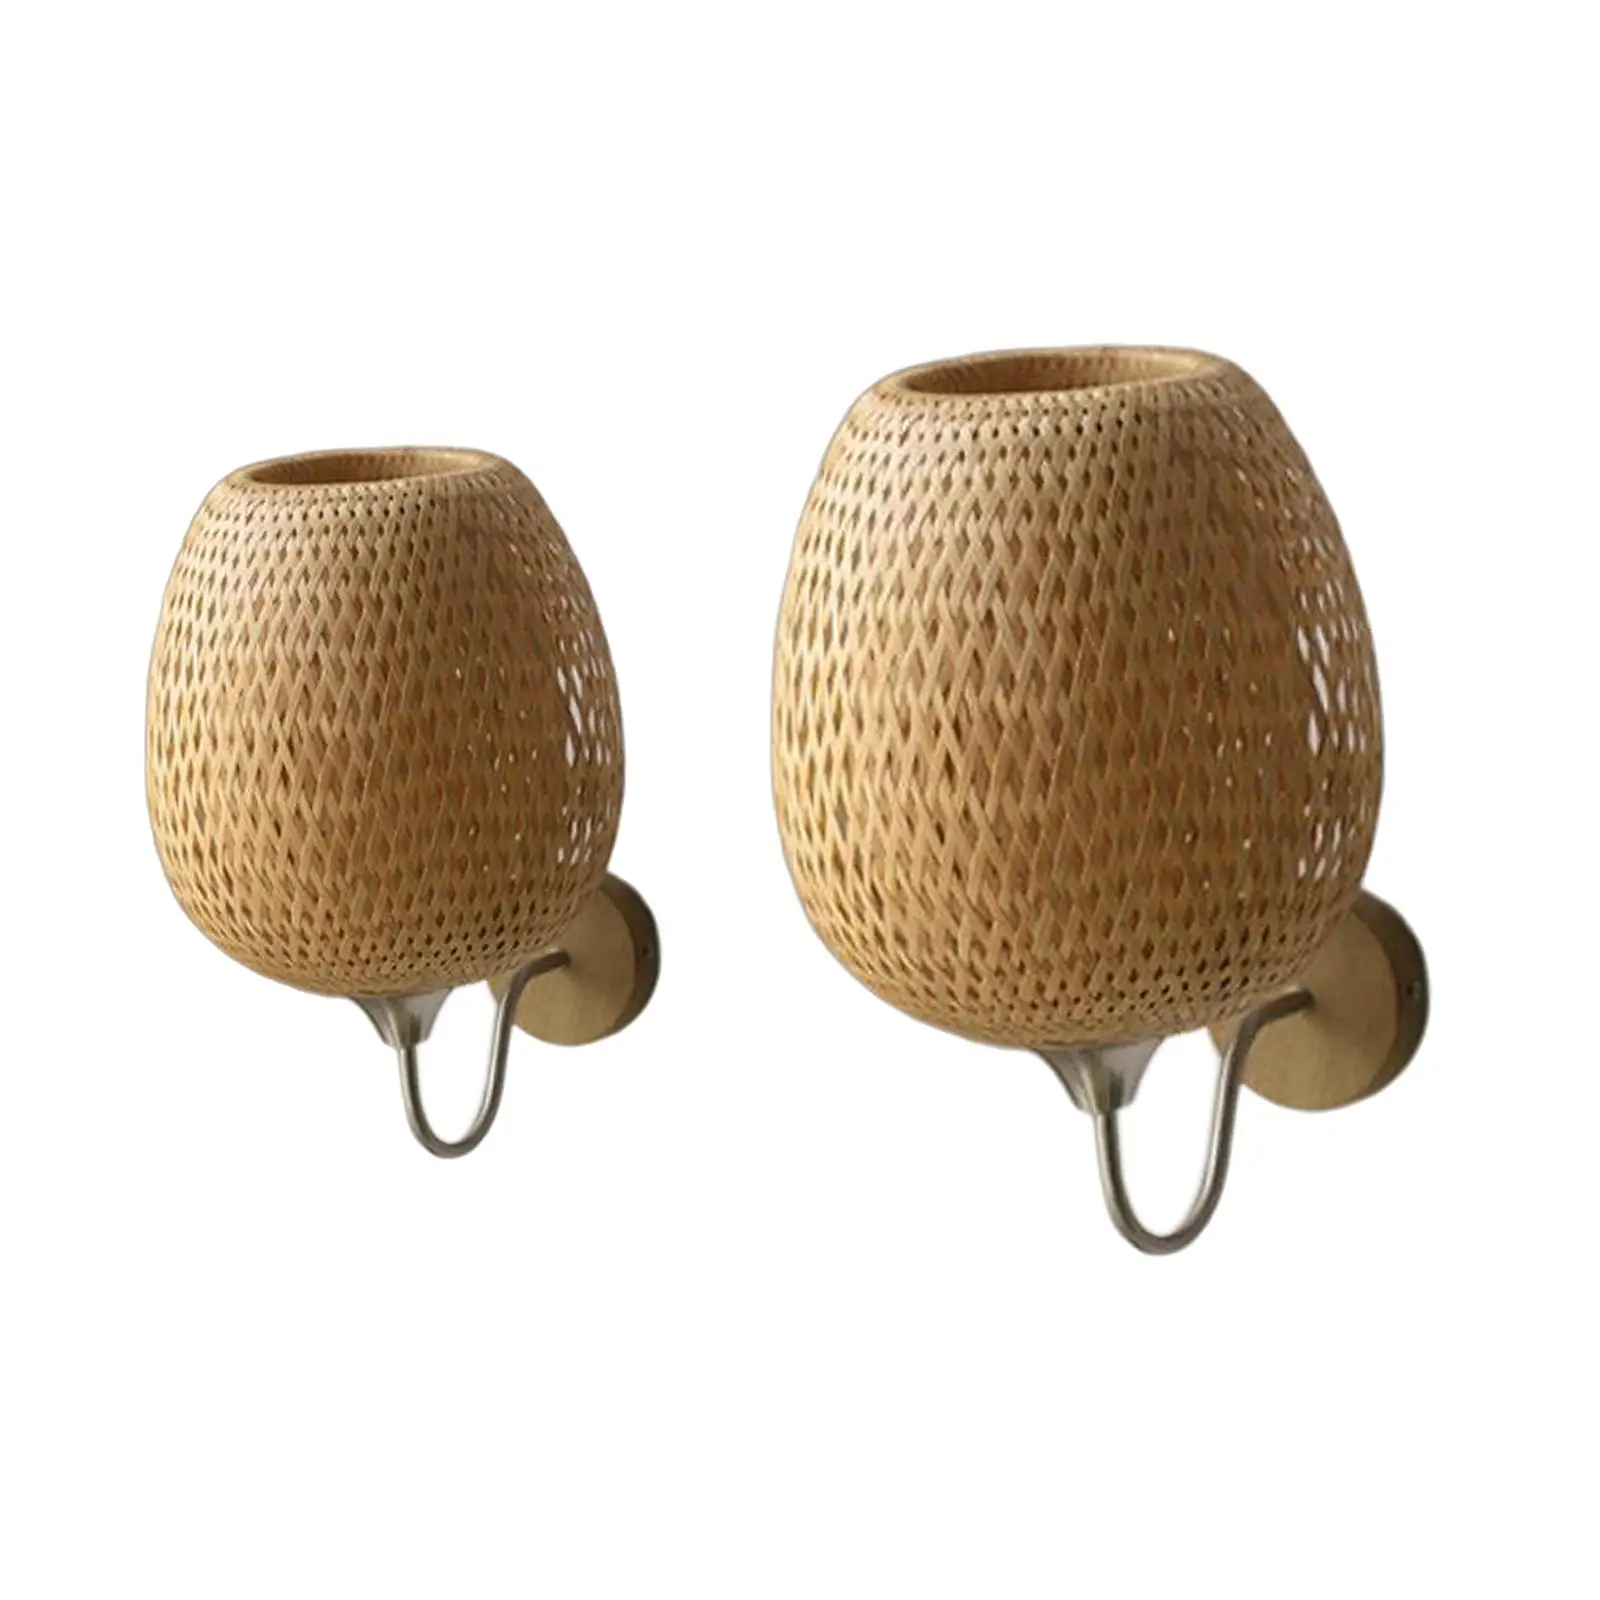 Rattan Wall Sconce Light Fixture Vintage for Living Room Indoor Fireplace